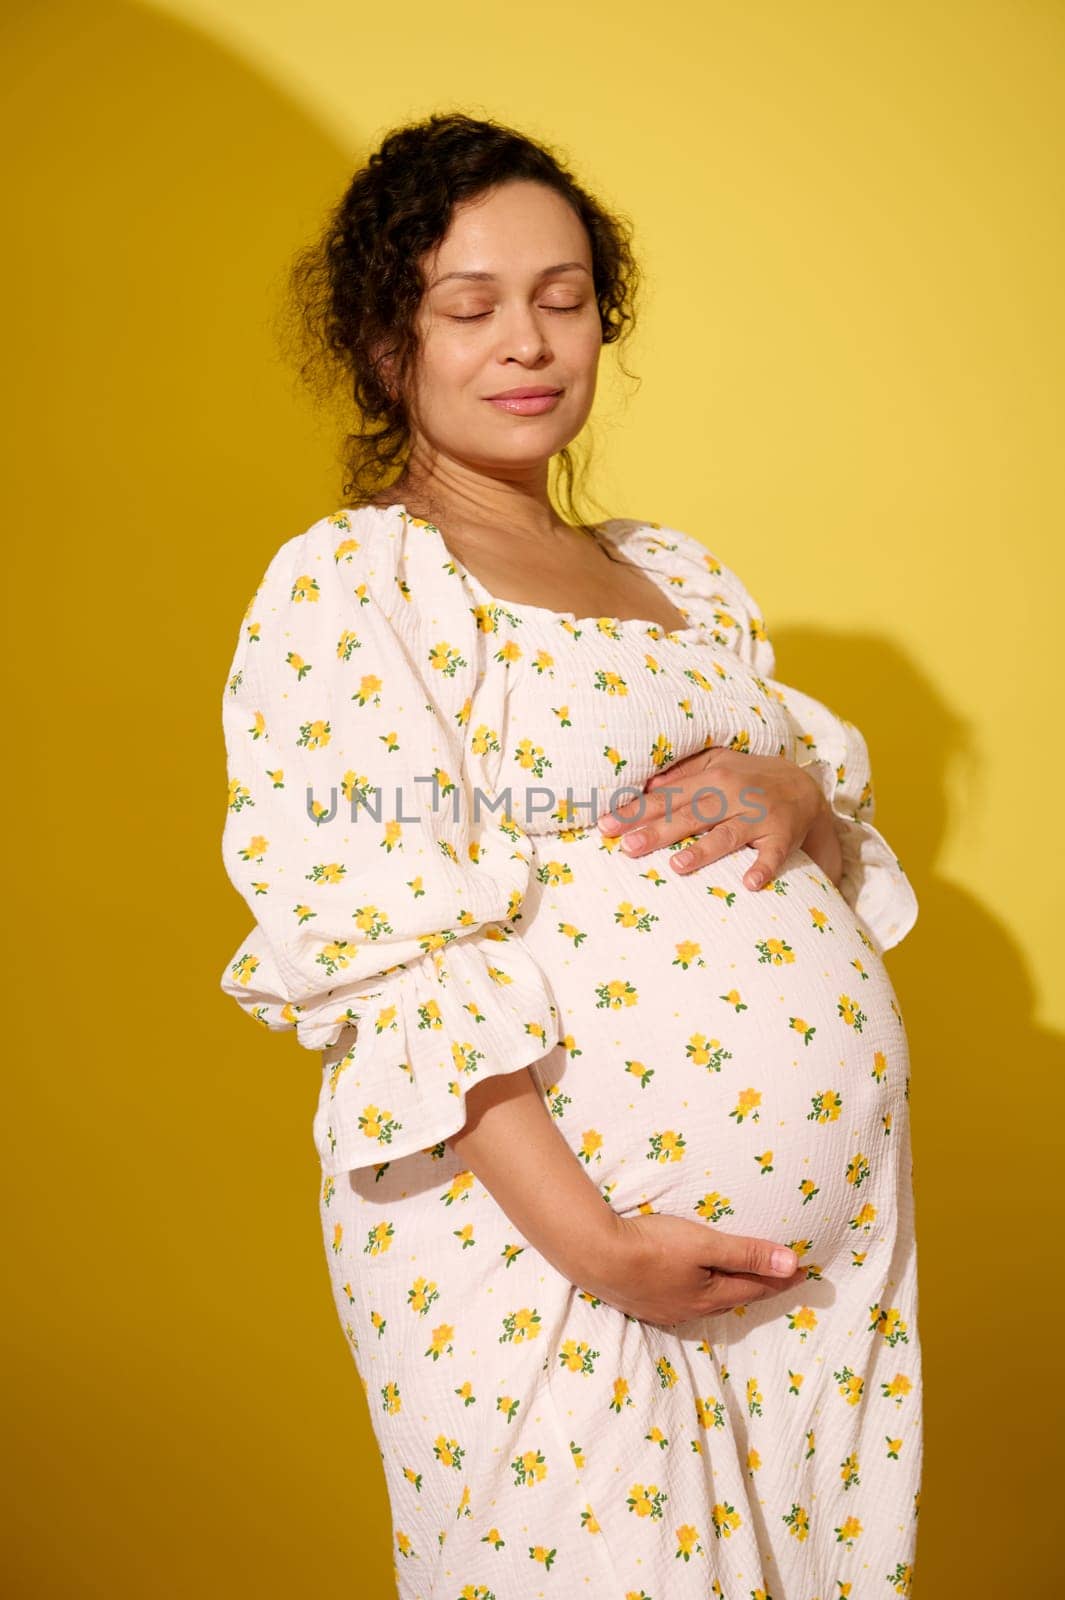 Happy pregnant woman, gravid expectant mother in stylish white summer sundress, touching her big belly, posing with her eyes closed, enjoing her pregnancy and maternity, isolated on yellow background.